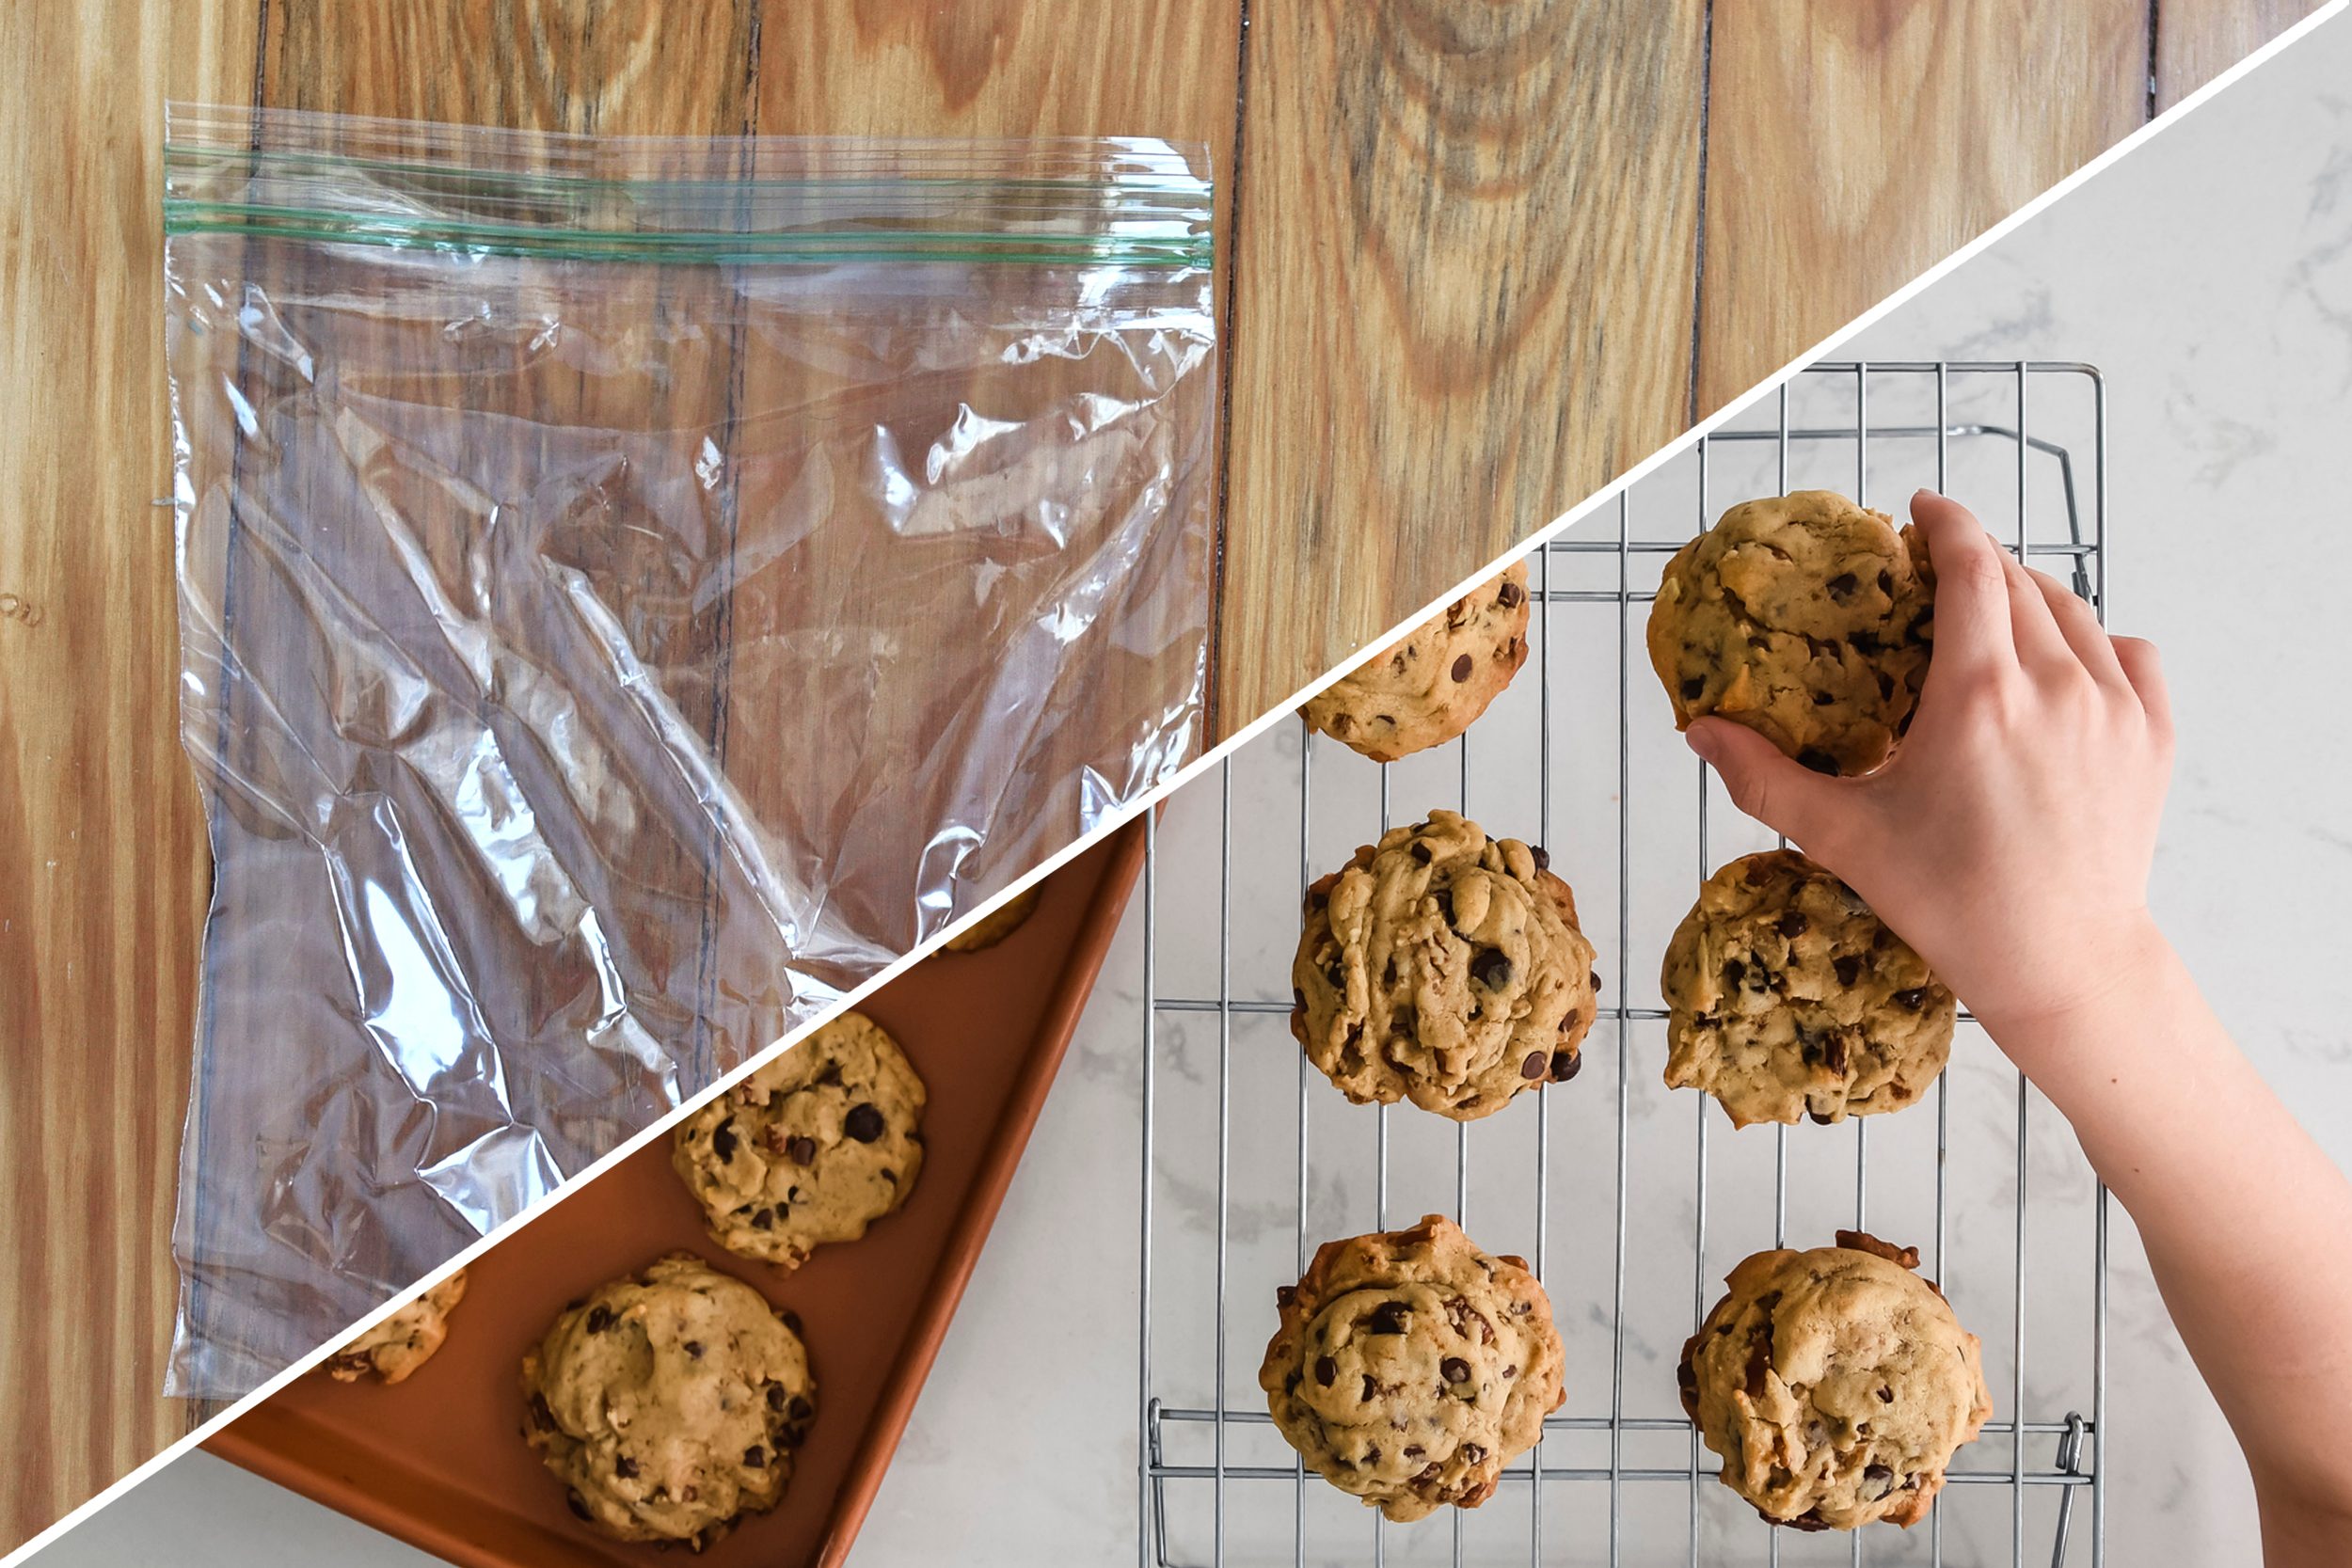 New Uses for Plastic Bags — How to Use Ziploc Bags Around the House